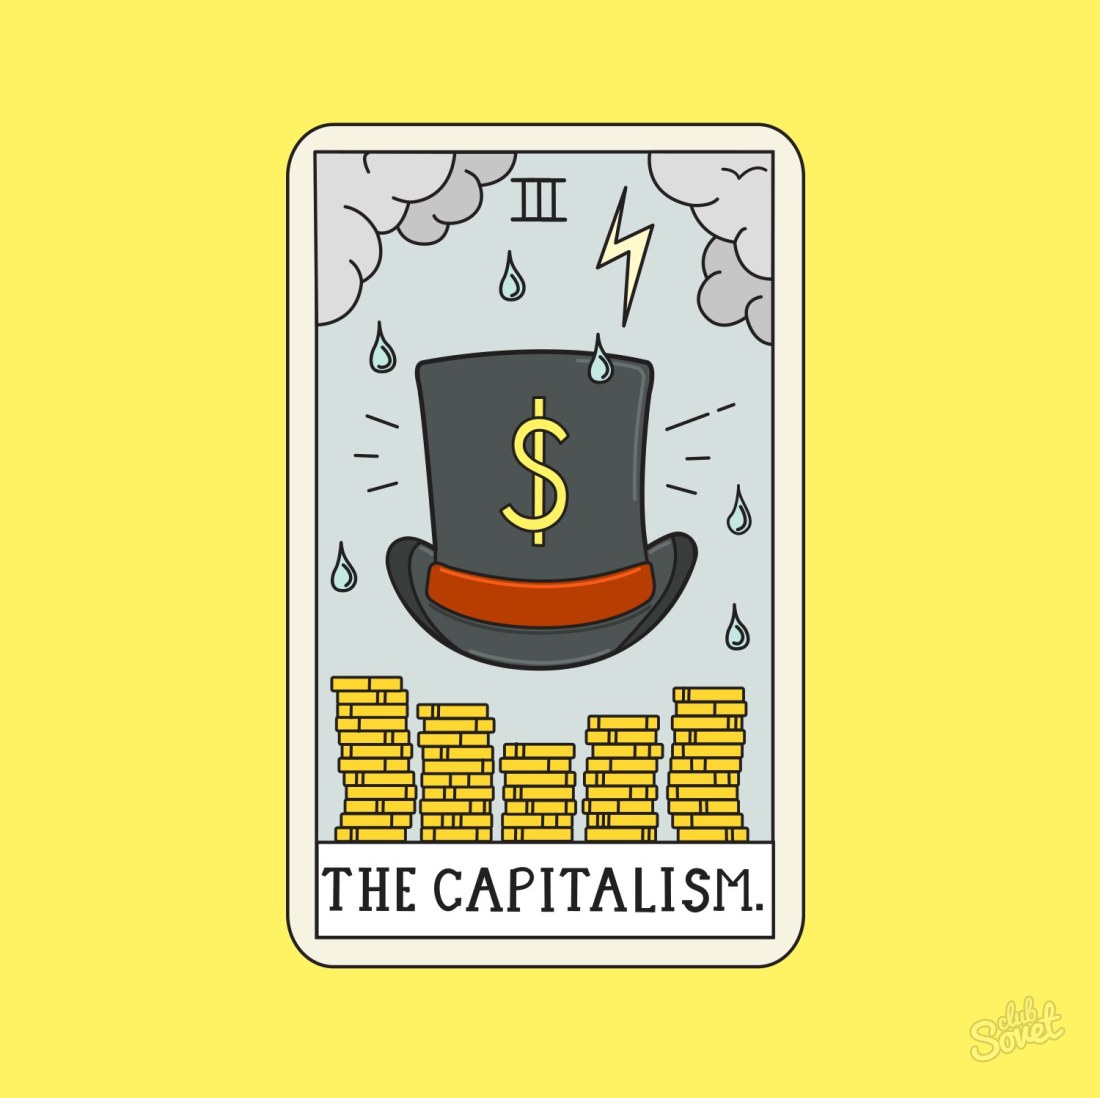 What is capitalism?